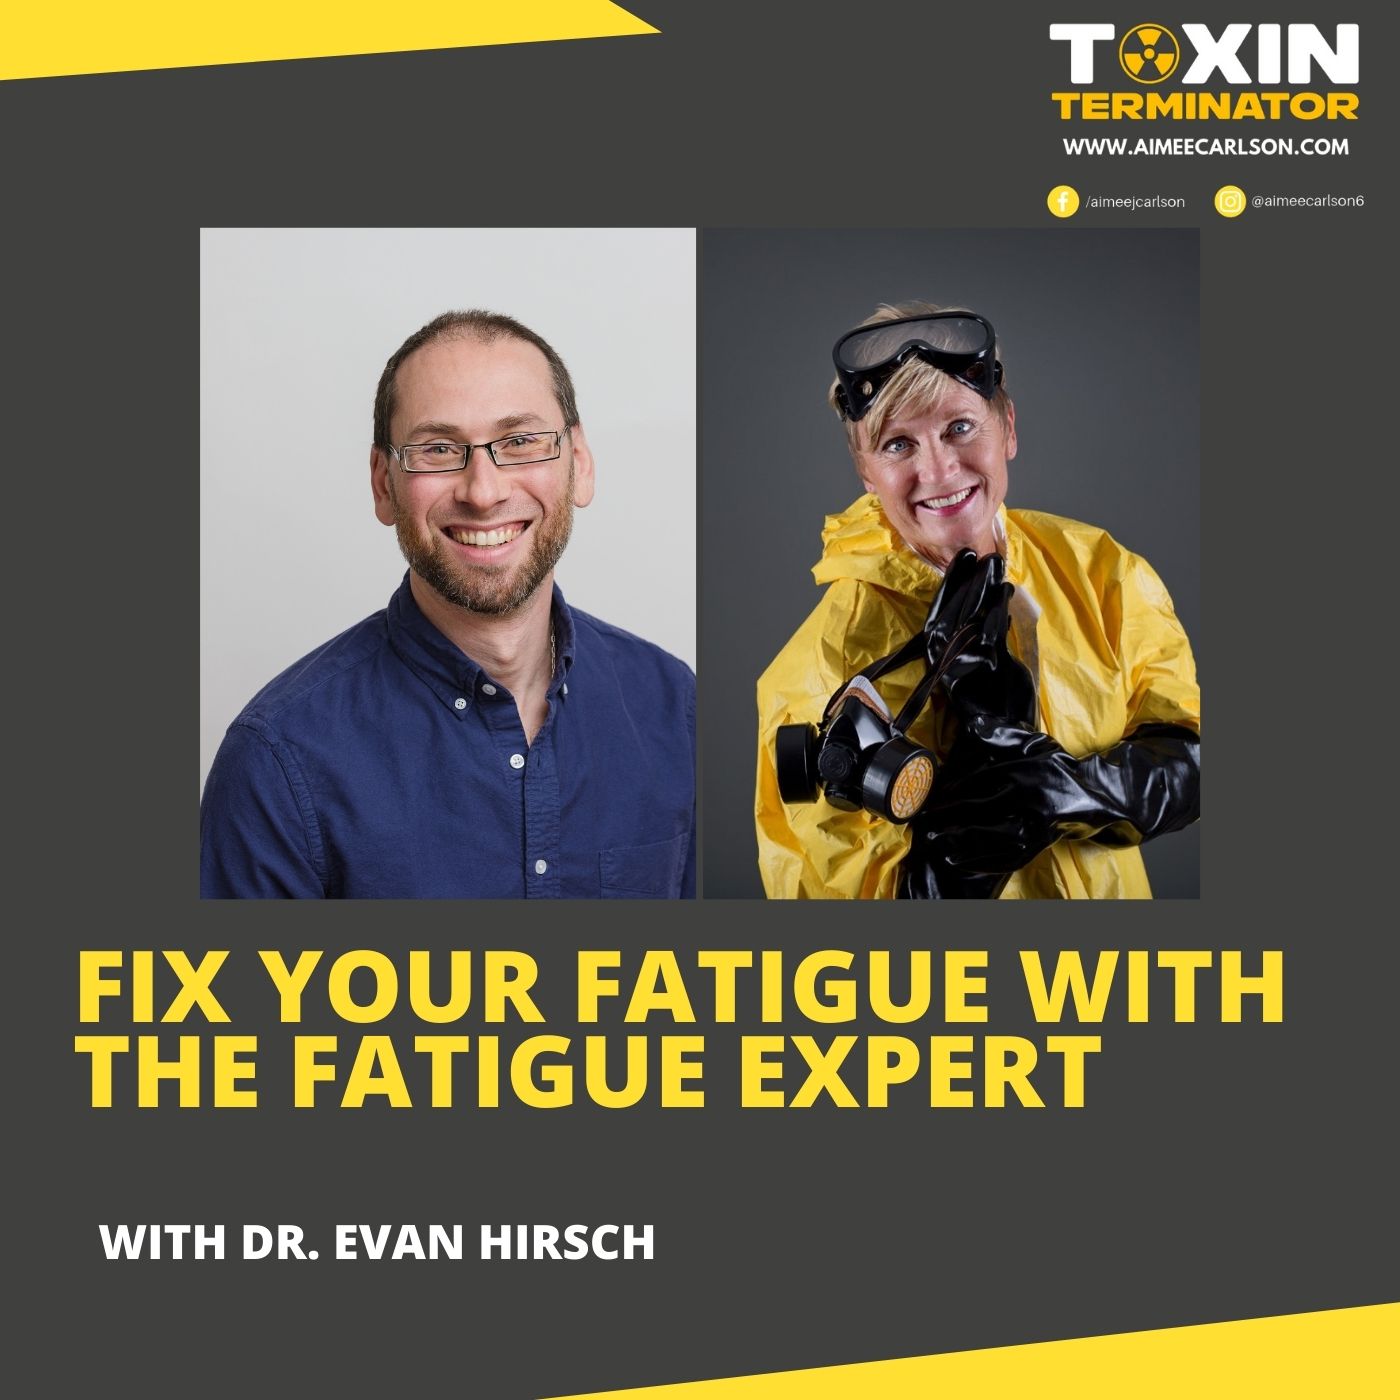 Fix Your Fatigue With The Fatigue Expert! with Dr. Evan Hirsch